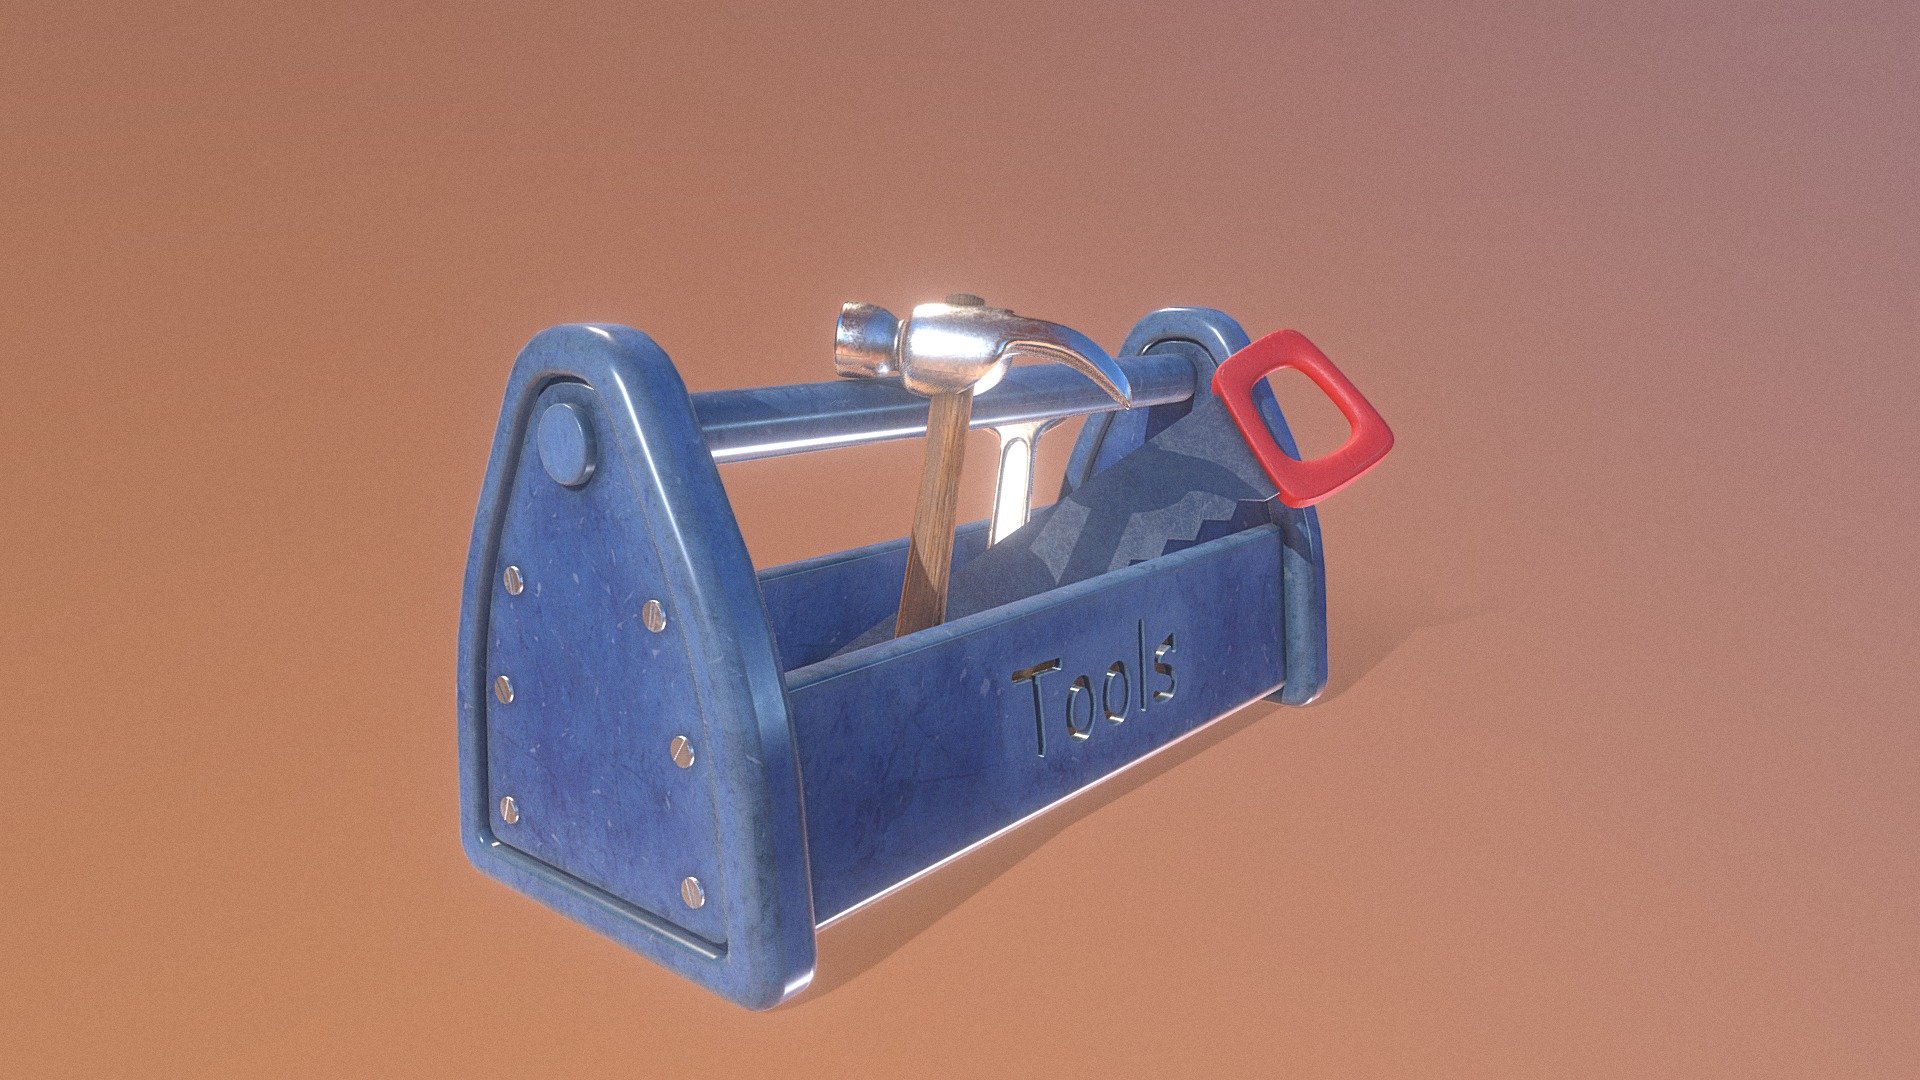 A toolbx filled with all the tools you will need in the world! This toolbox is particularly cartoonish 3d model